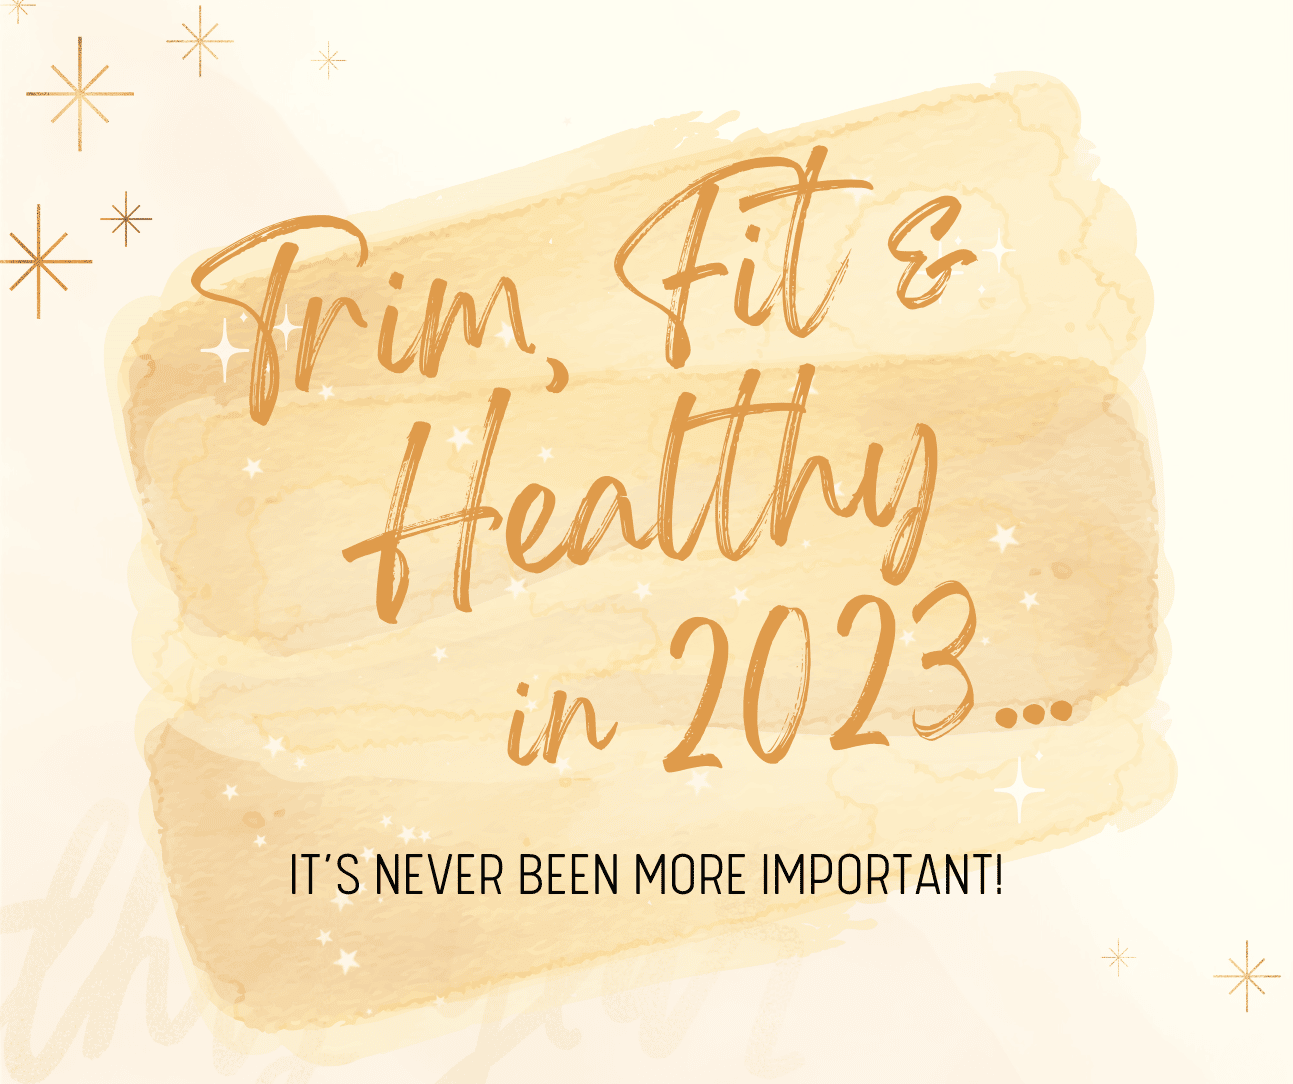 Fit, Trim, and Healthy in 2023!